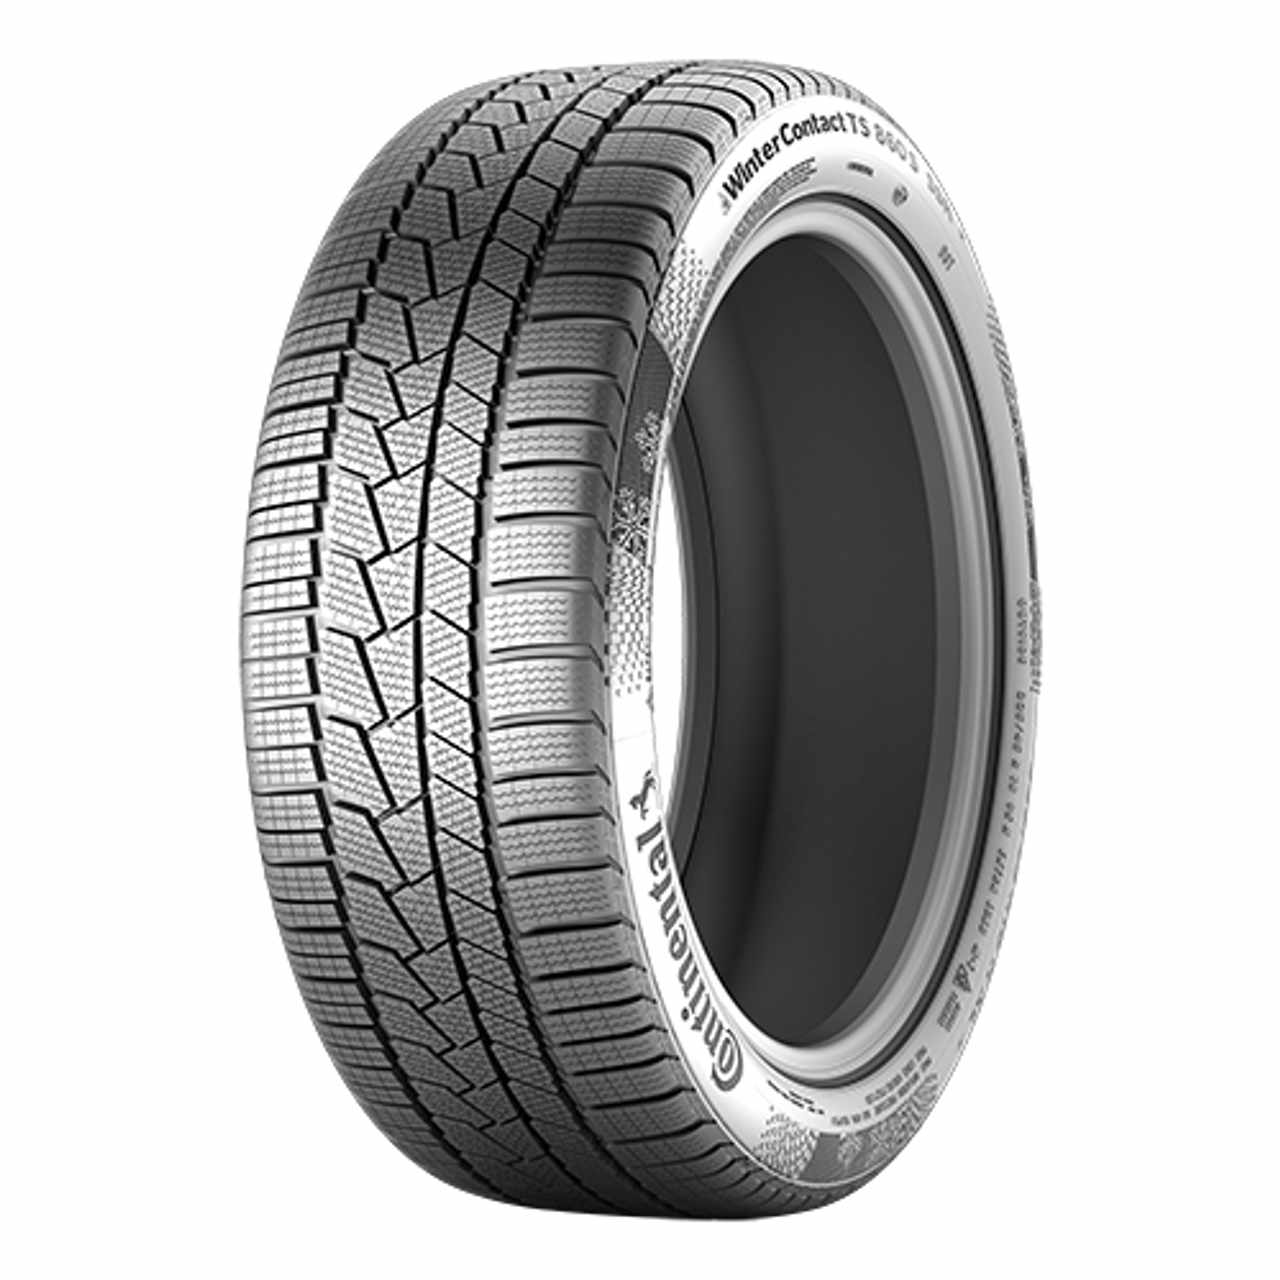 CONTINENTAL WINTERCONTACT TS 860 S (*) (MO) (EVc) 275/35R20 102V BSW XL